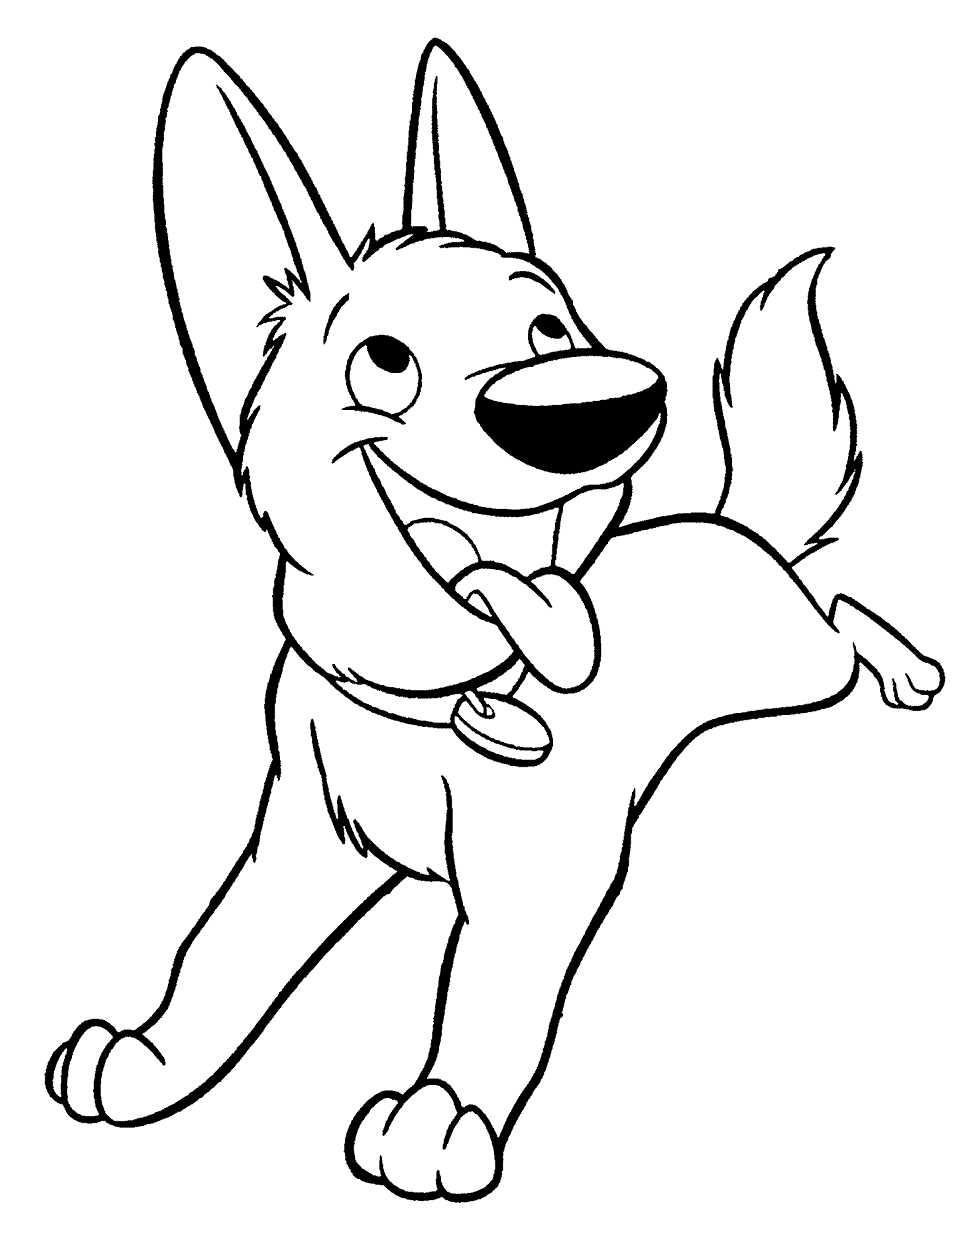 Happy Bolt Coloring Page